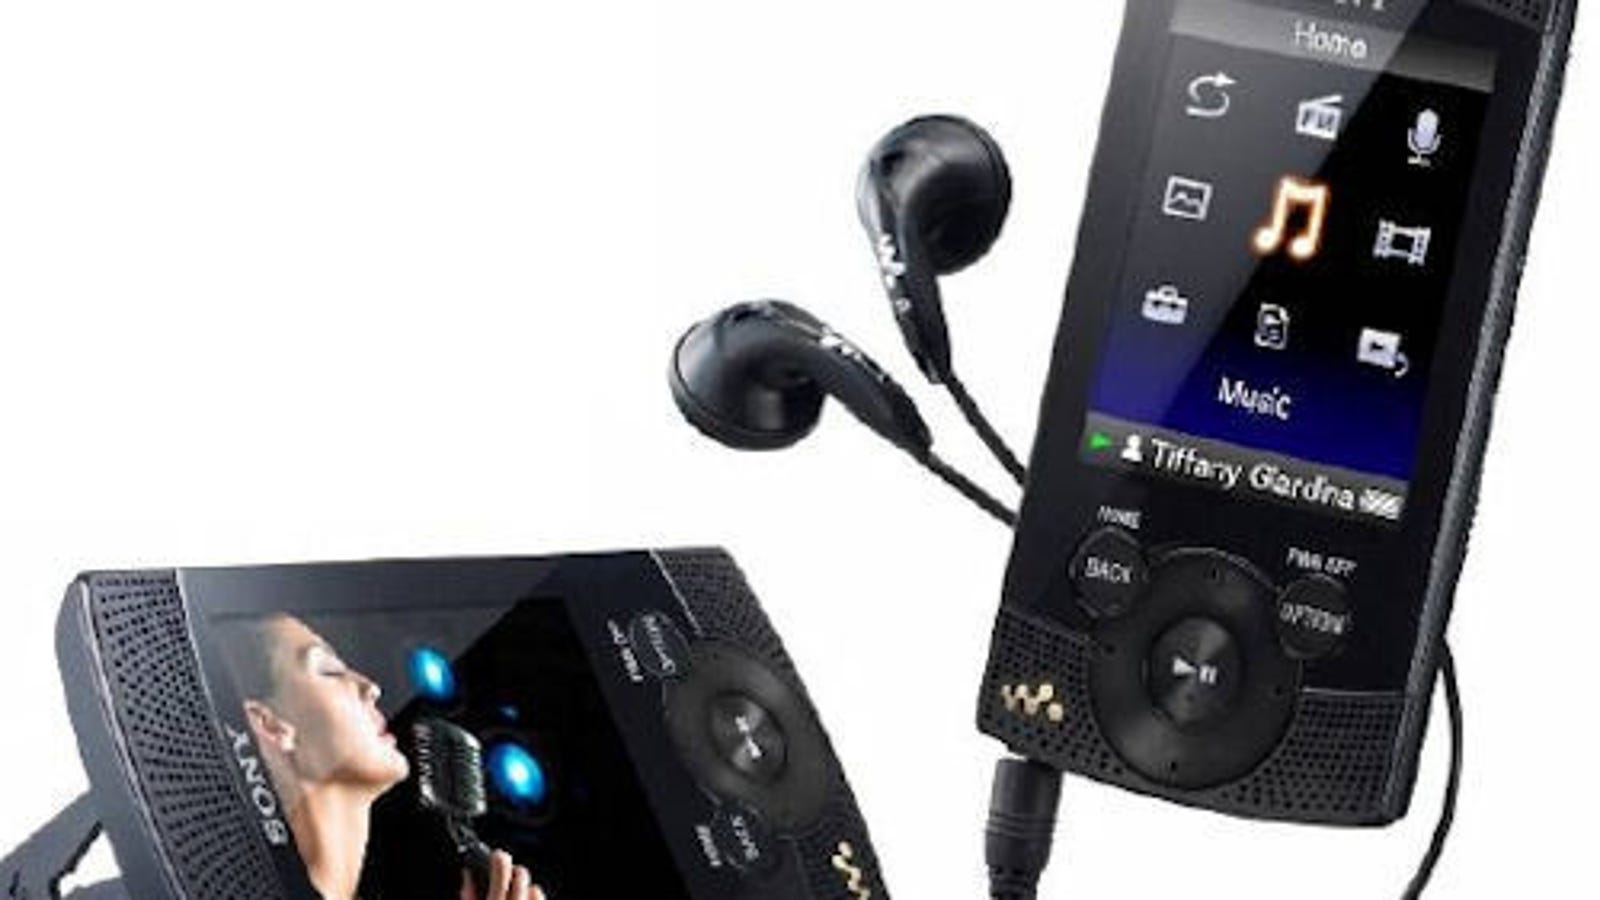 Sony's New SSeries Walkman Specs, Pricing Leaked By French Retailer